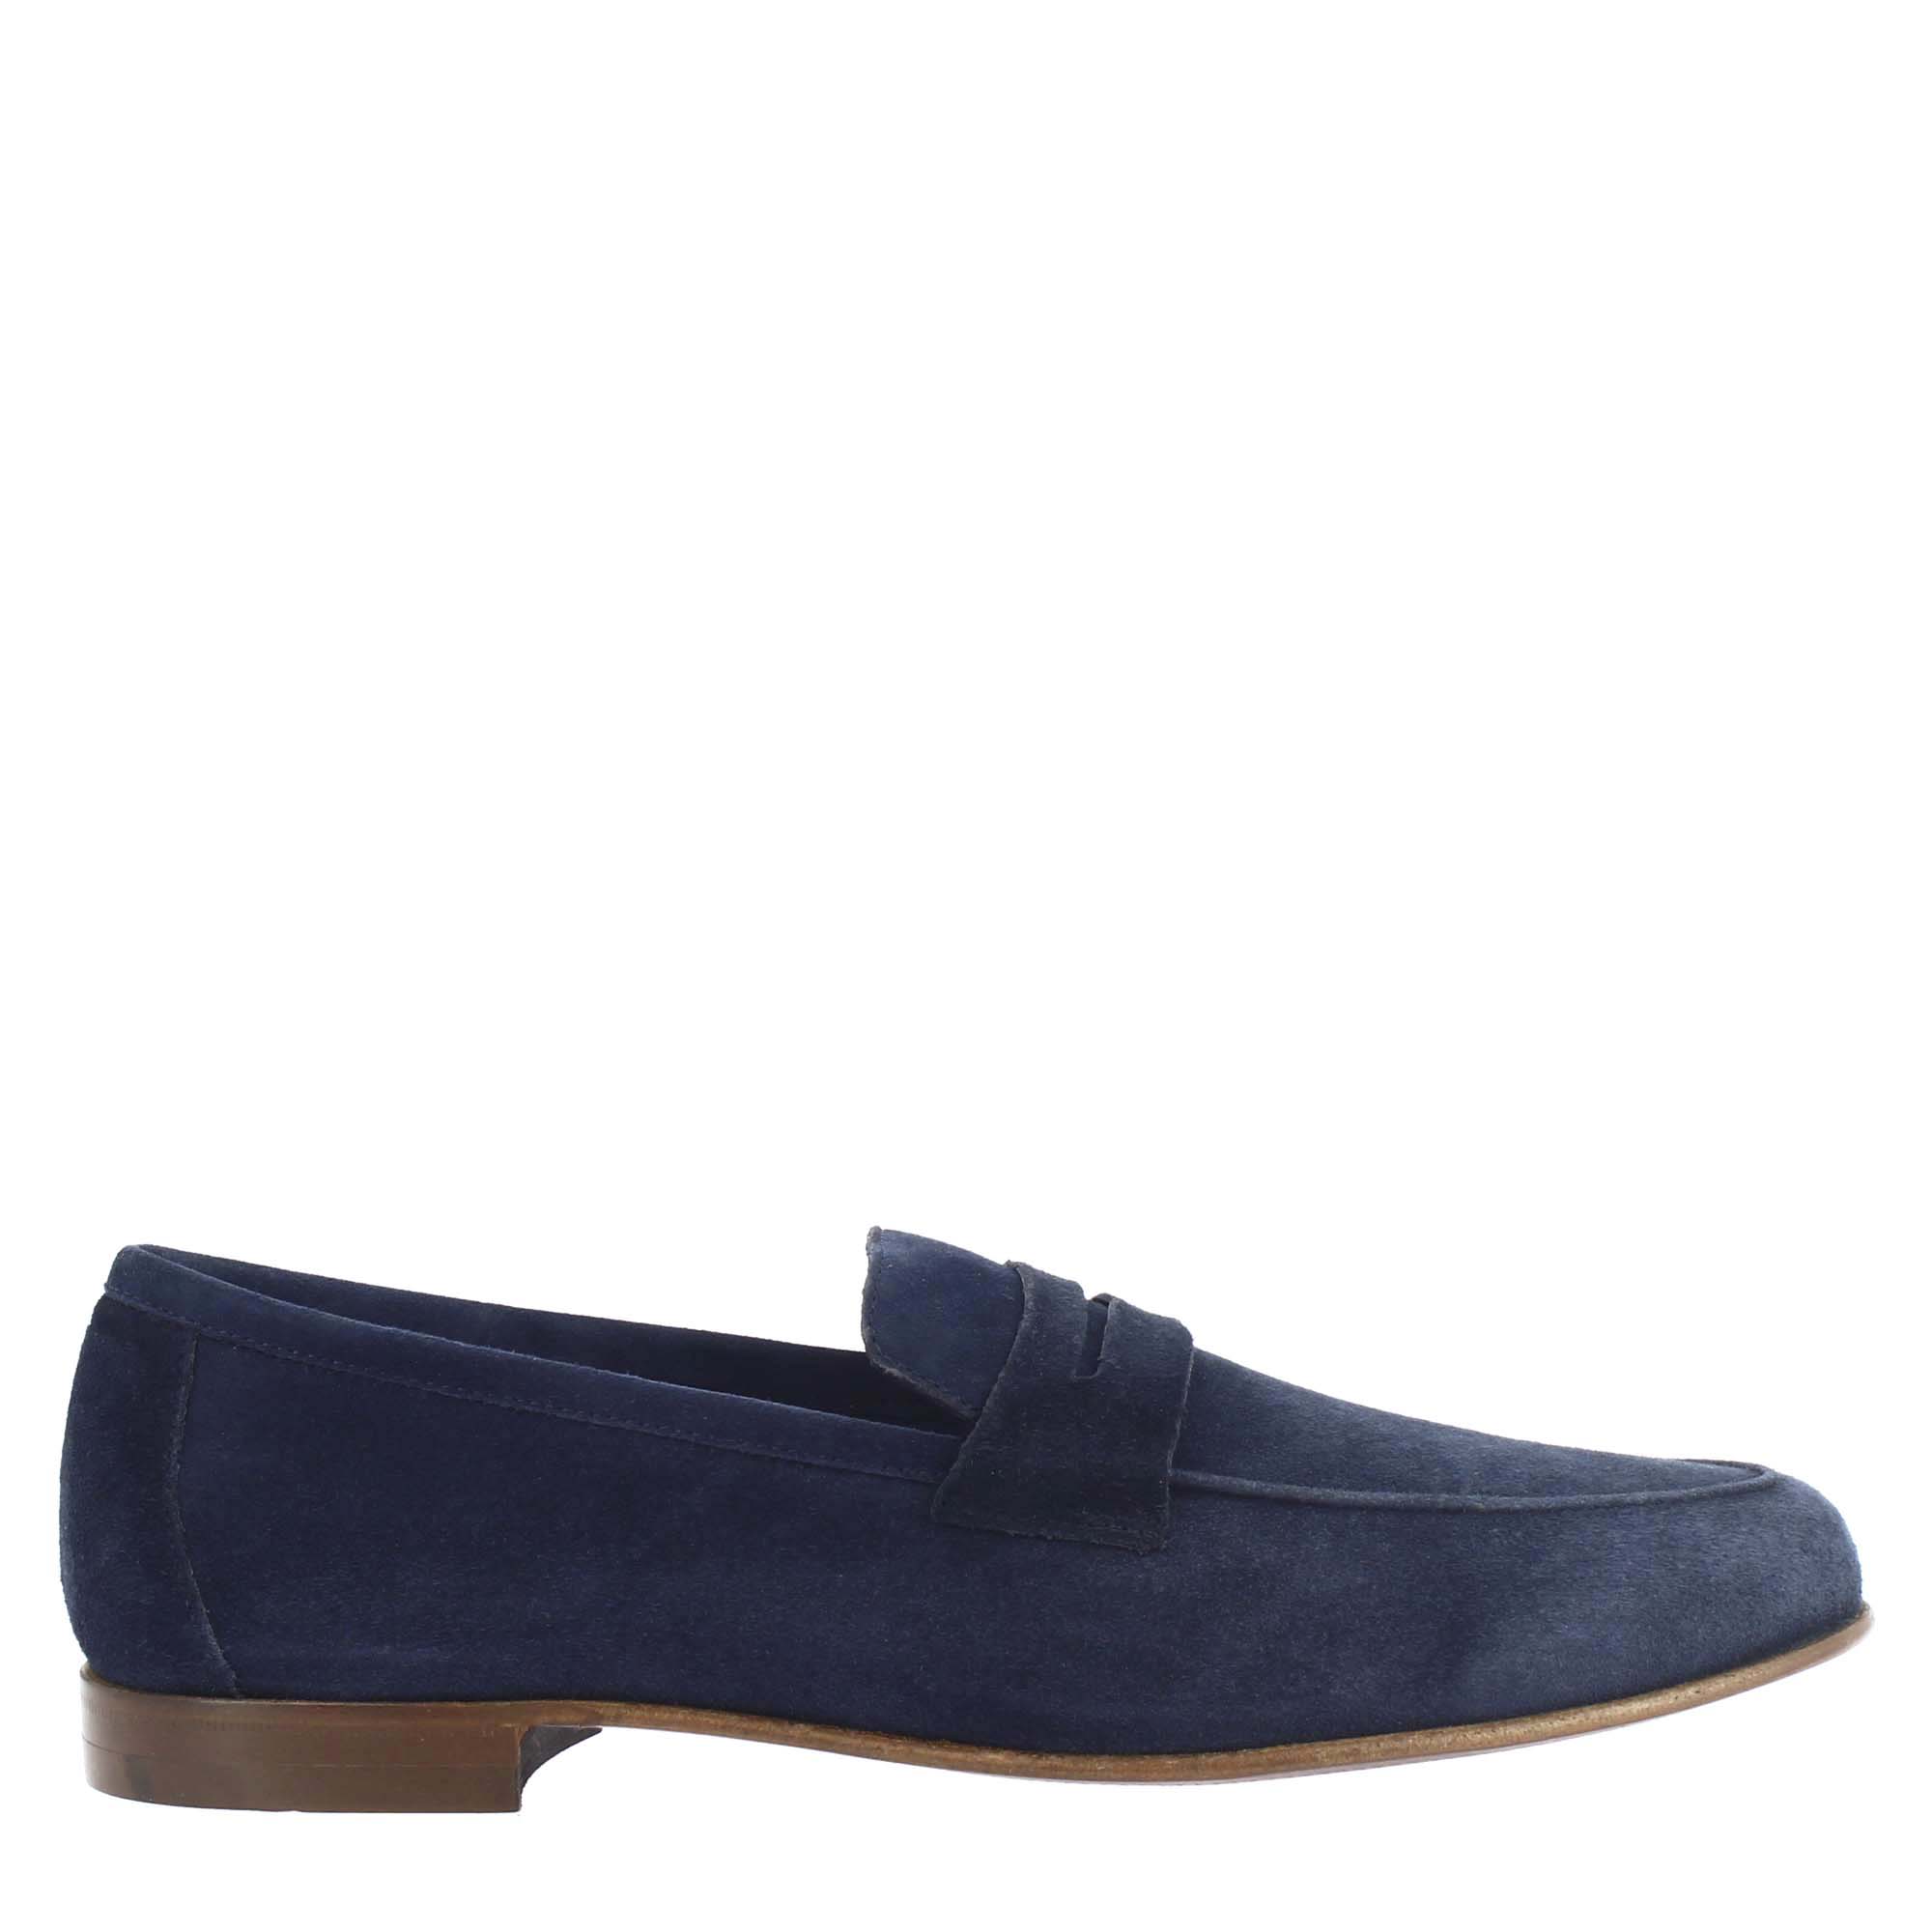 Blue Suede Pocket Style Loafers